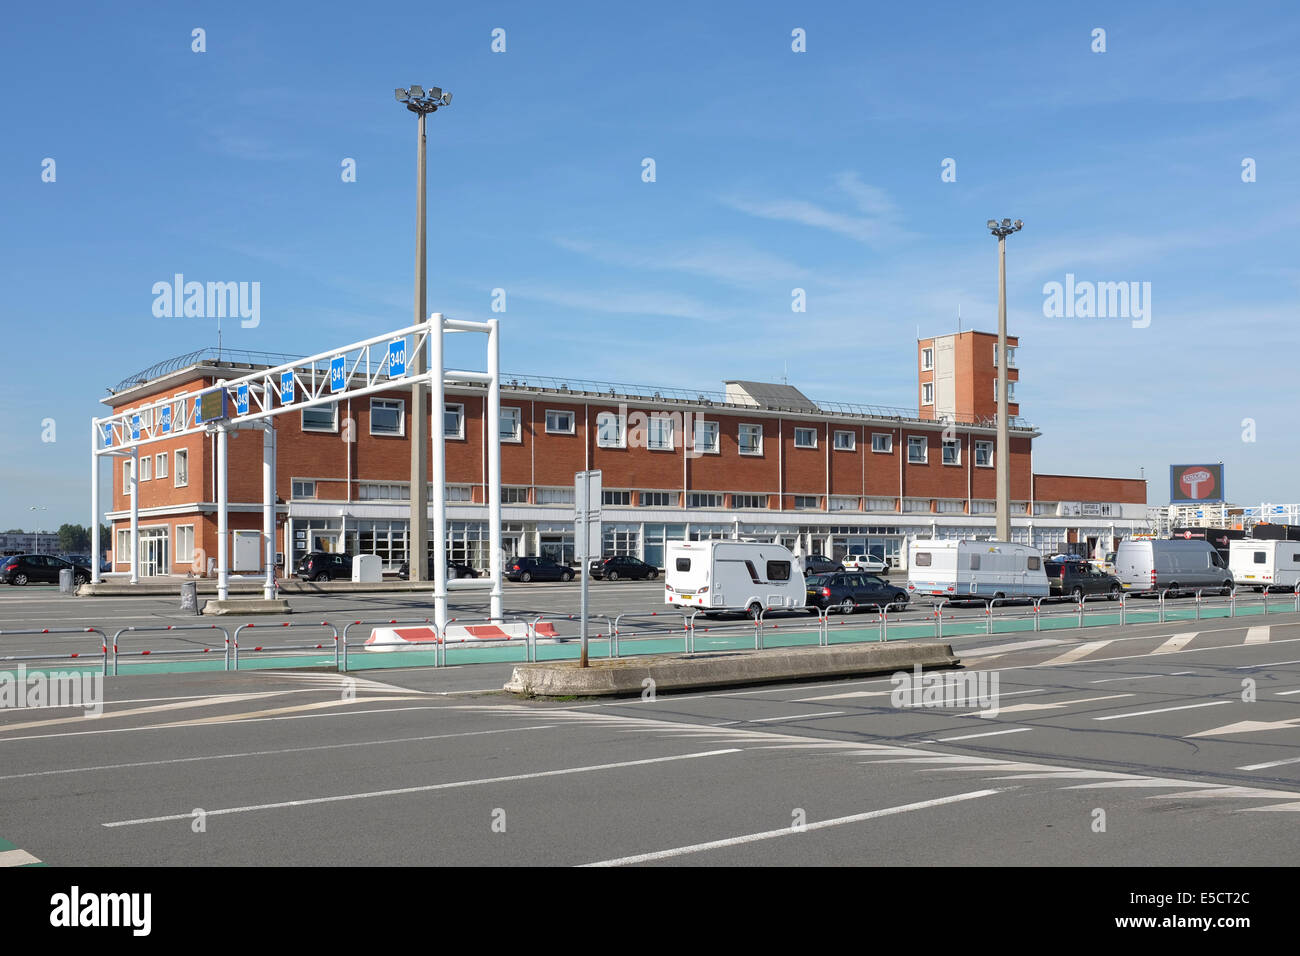 Vehicles waiting for boarding the ferry near to one of the buildings at Calais Port, France Stock Photo